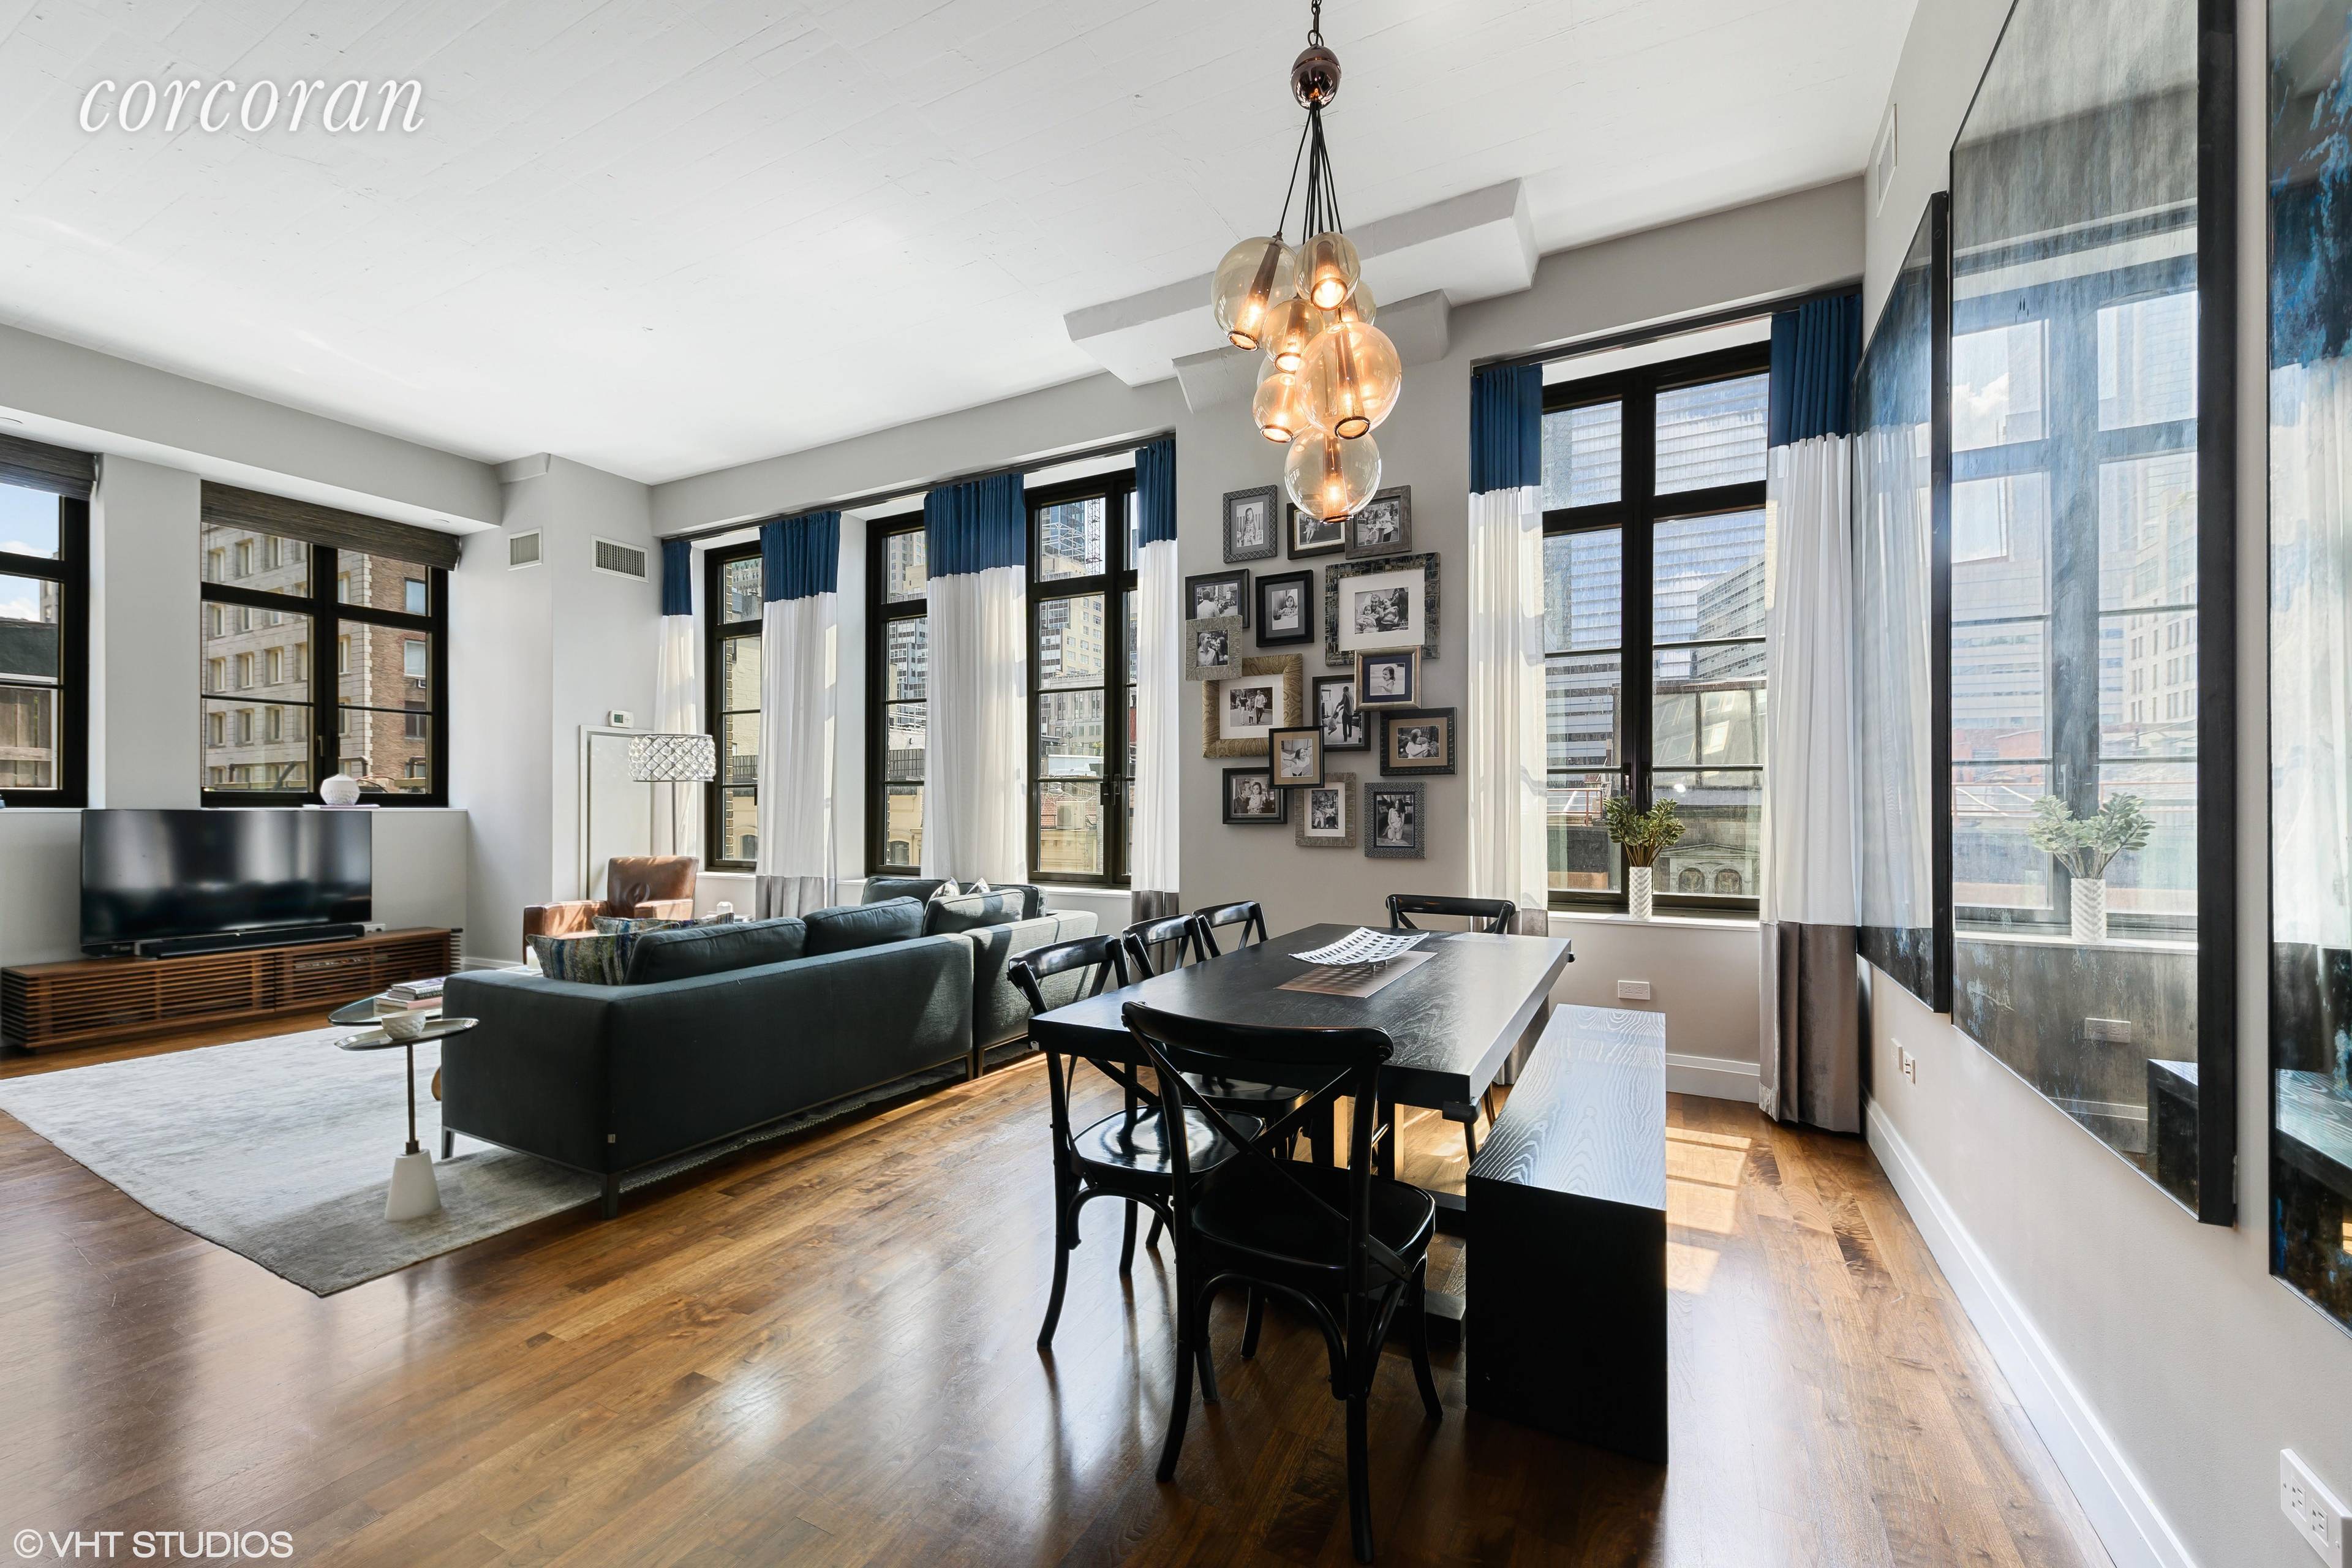 Welcome to 143 Reade, Unit 6C, a beautiful and bright three bedroom apartment in a full service condominium in Tribeca.